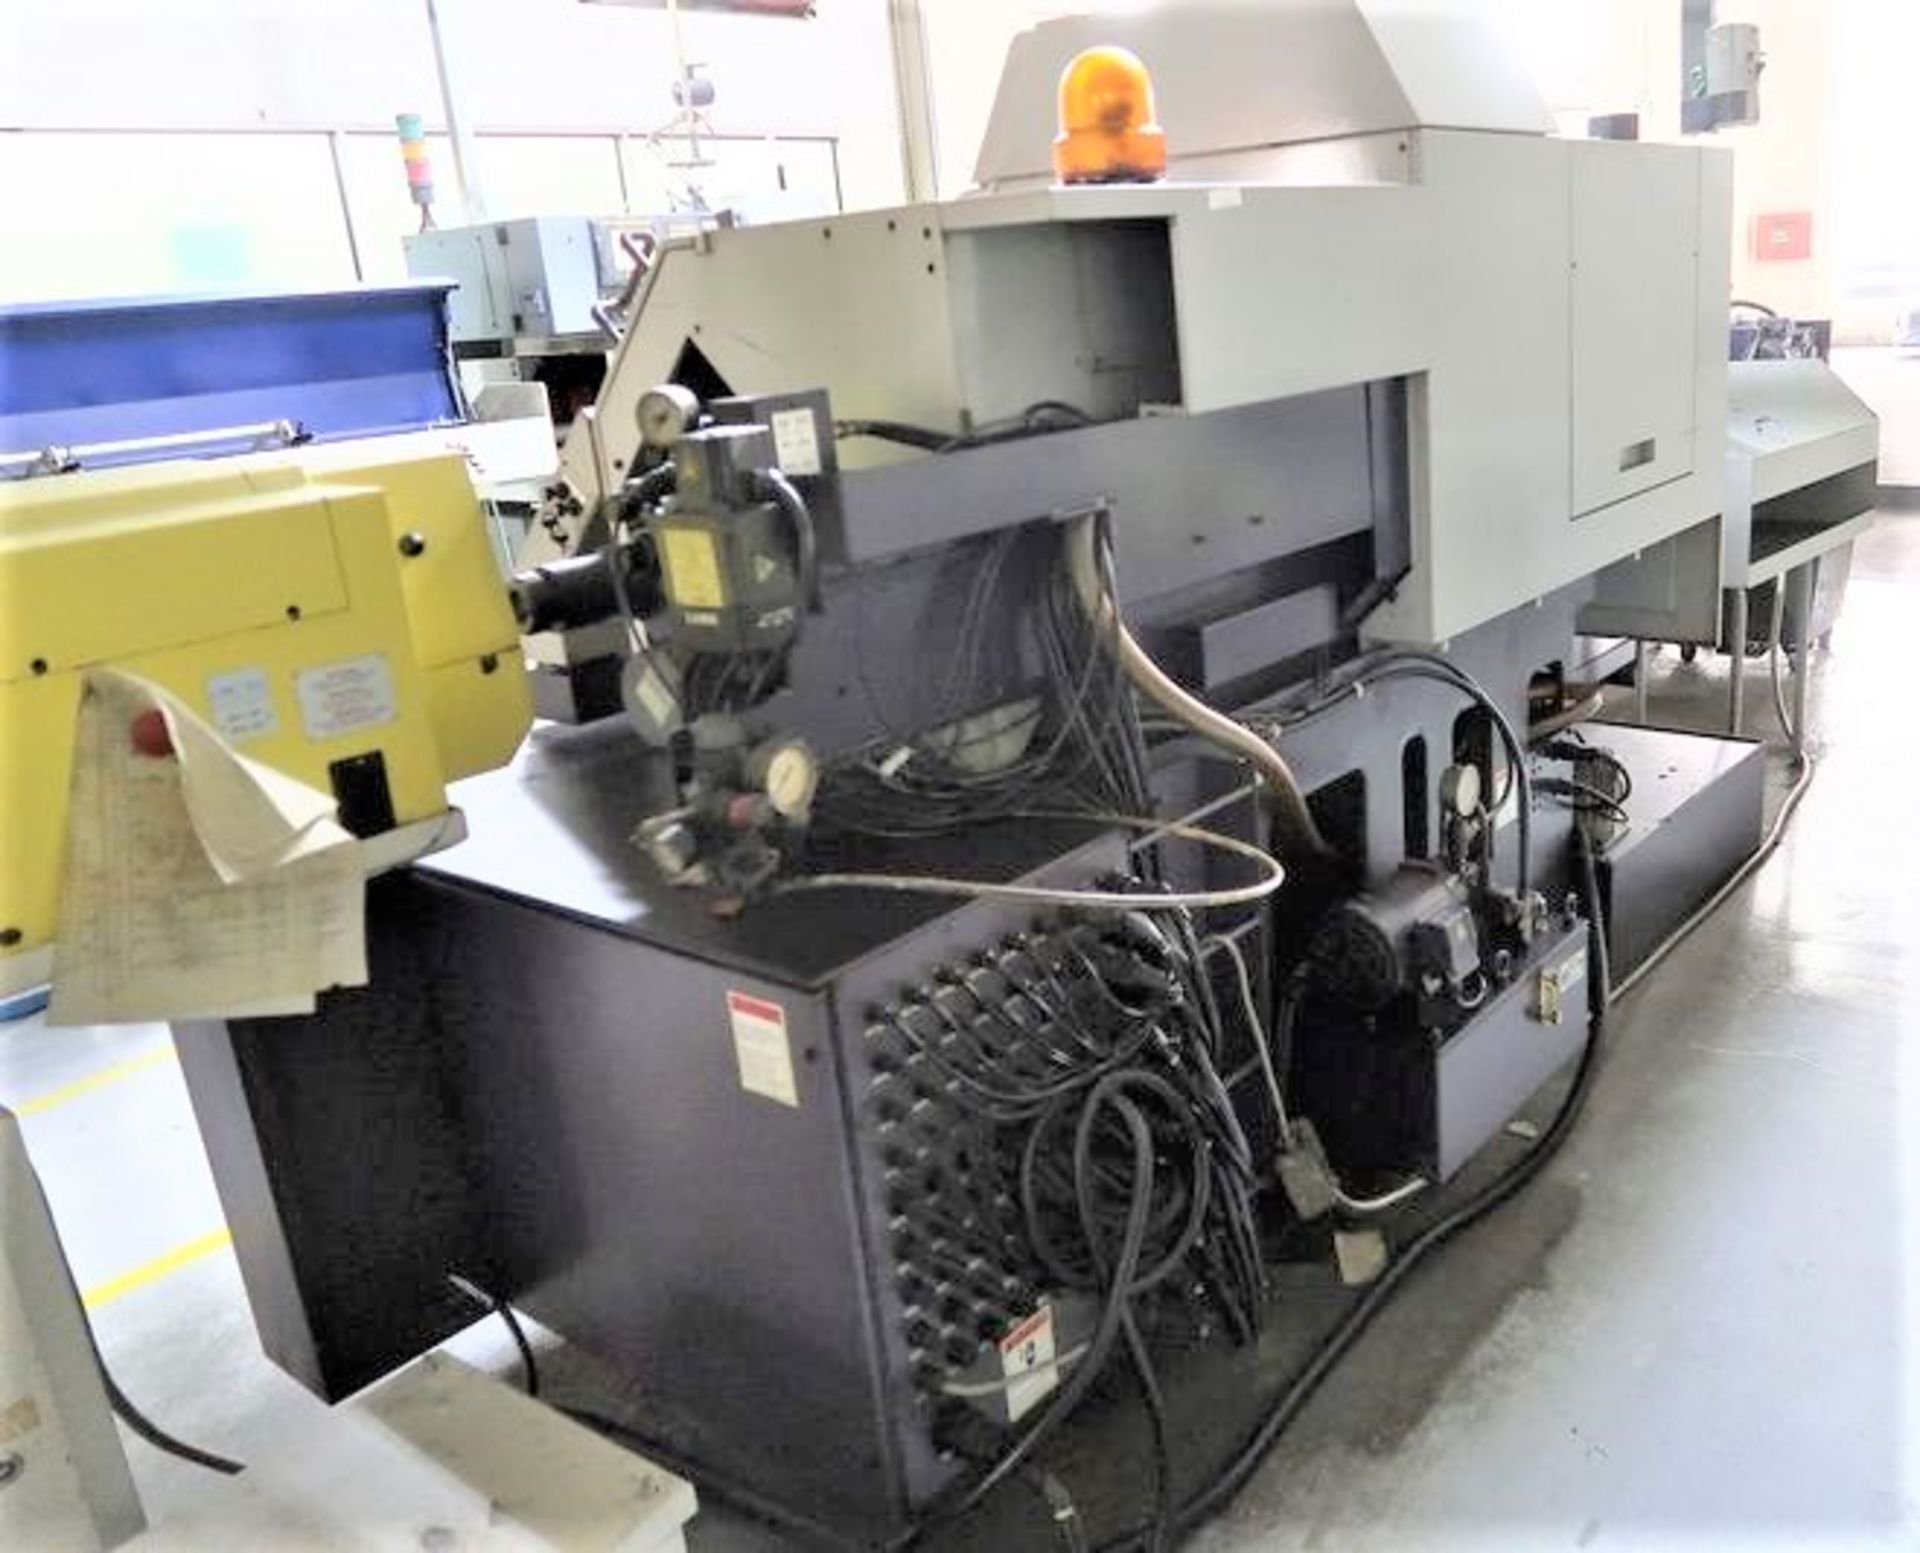 25MM Citizen L-25 CNC Swiss Type Sliding Headstock Automatic Lathe, S/N V6592, New 1997 - Image 9 of 11